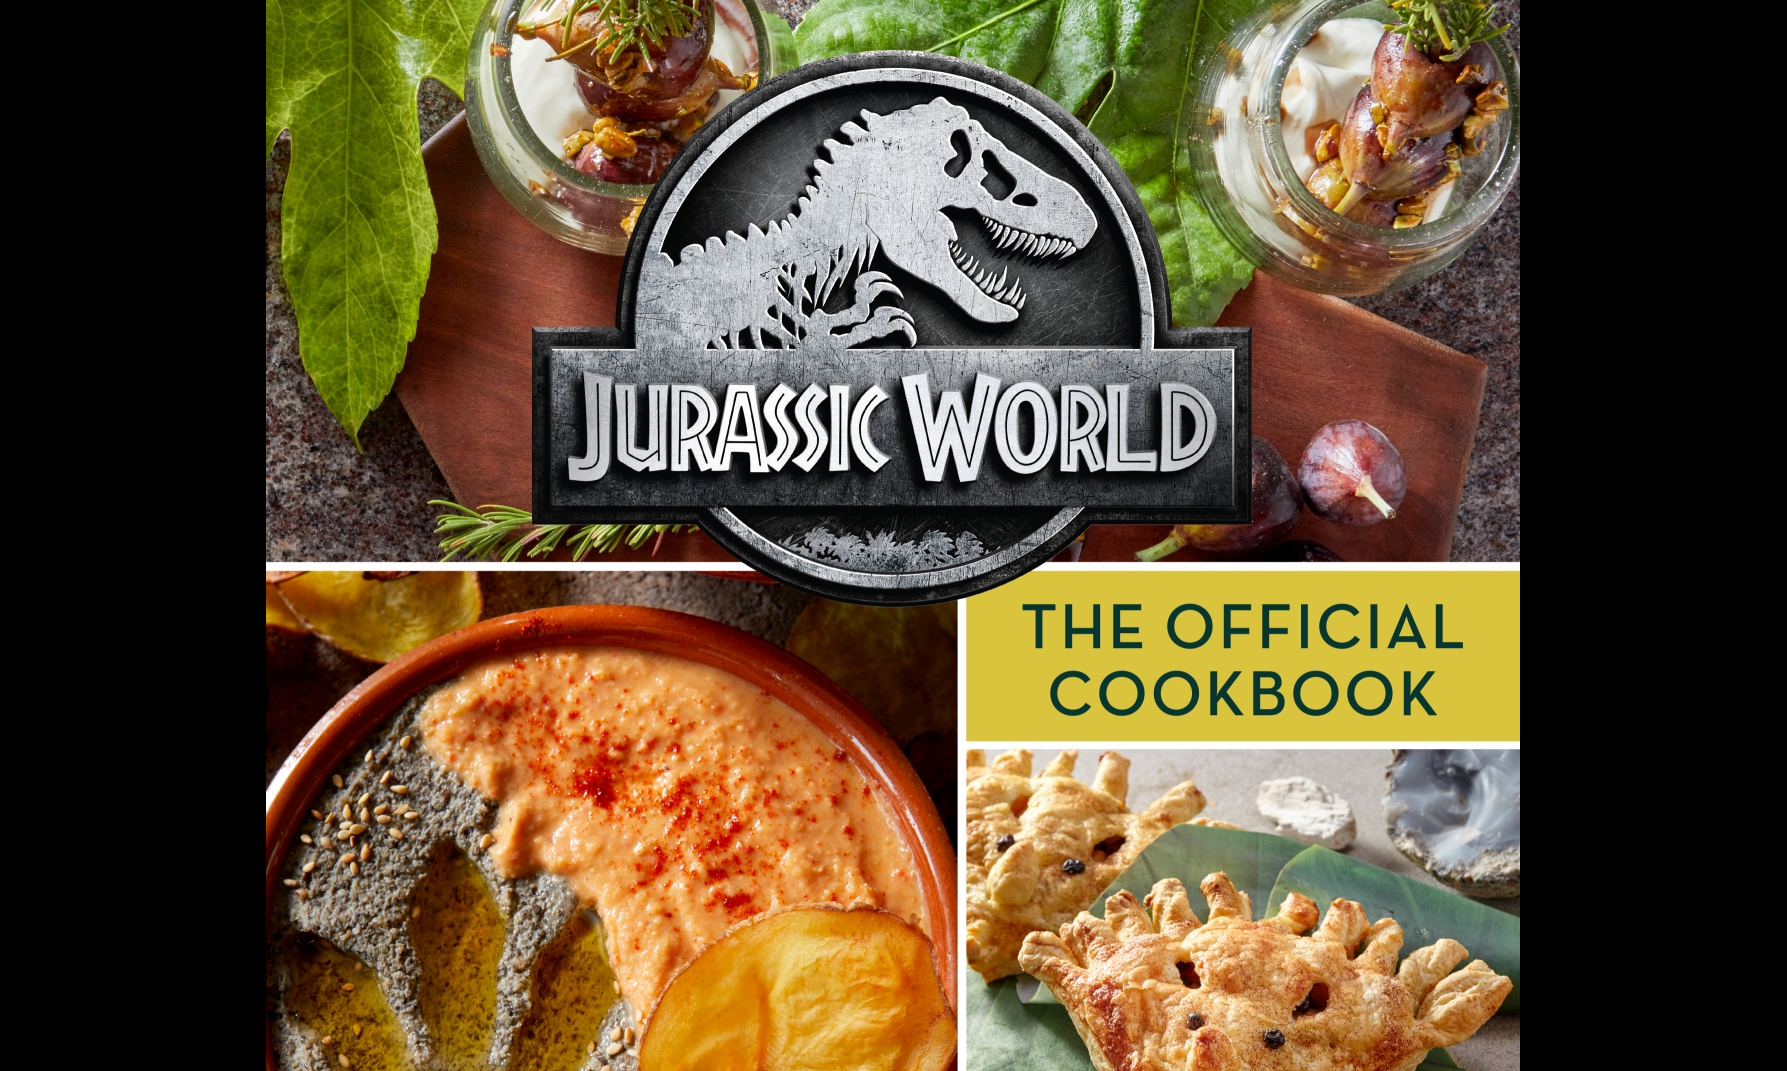 New ‘Jurassic World Cookbook’ & ‘Hungry Dinosaur’ Kids Book Are Coming Soon From Insight Editions!